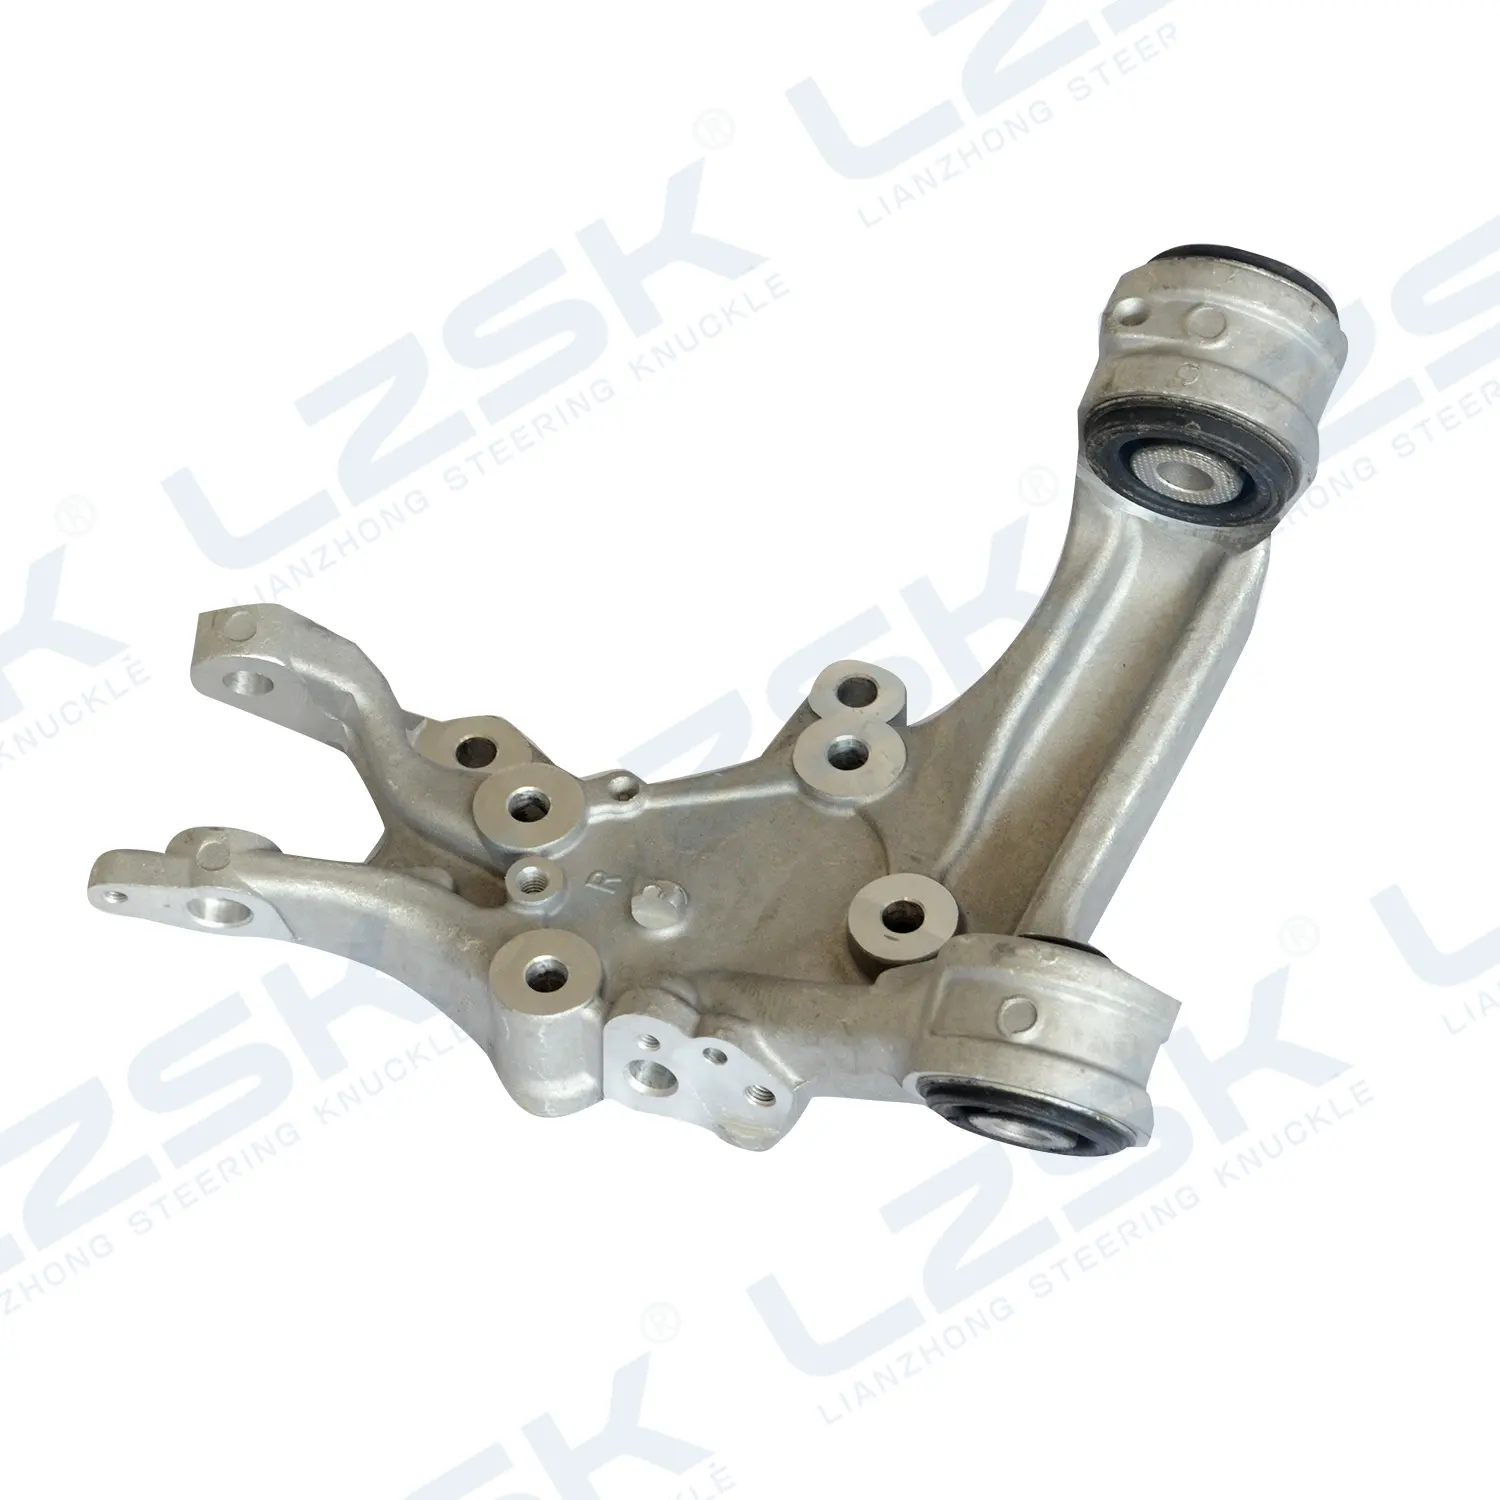 Prime Quality ALUMINIUM SUSPENSION PARTS STEERING KNUCKLE HONDA CIVIC VIII 8 52210-SNA-A50 Supplier in China